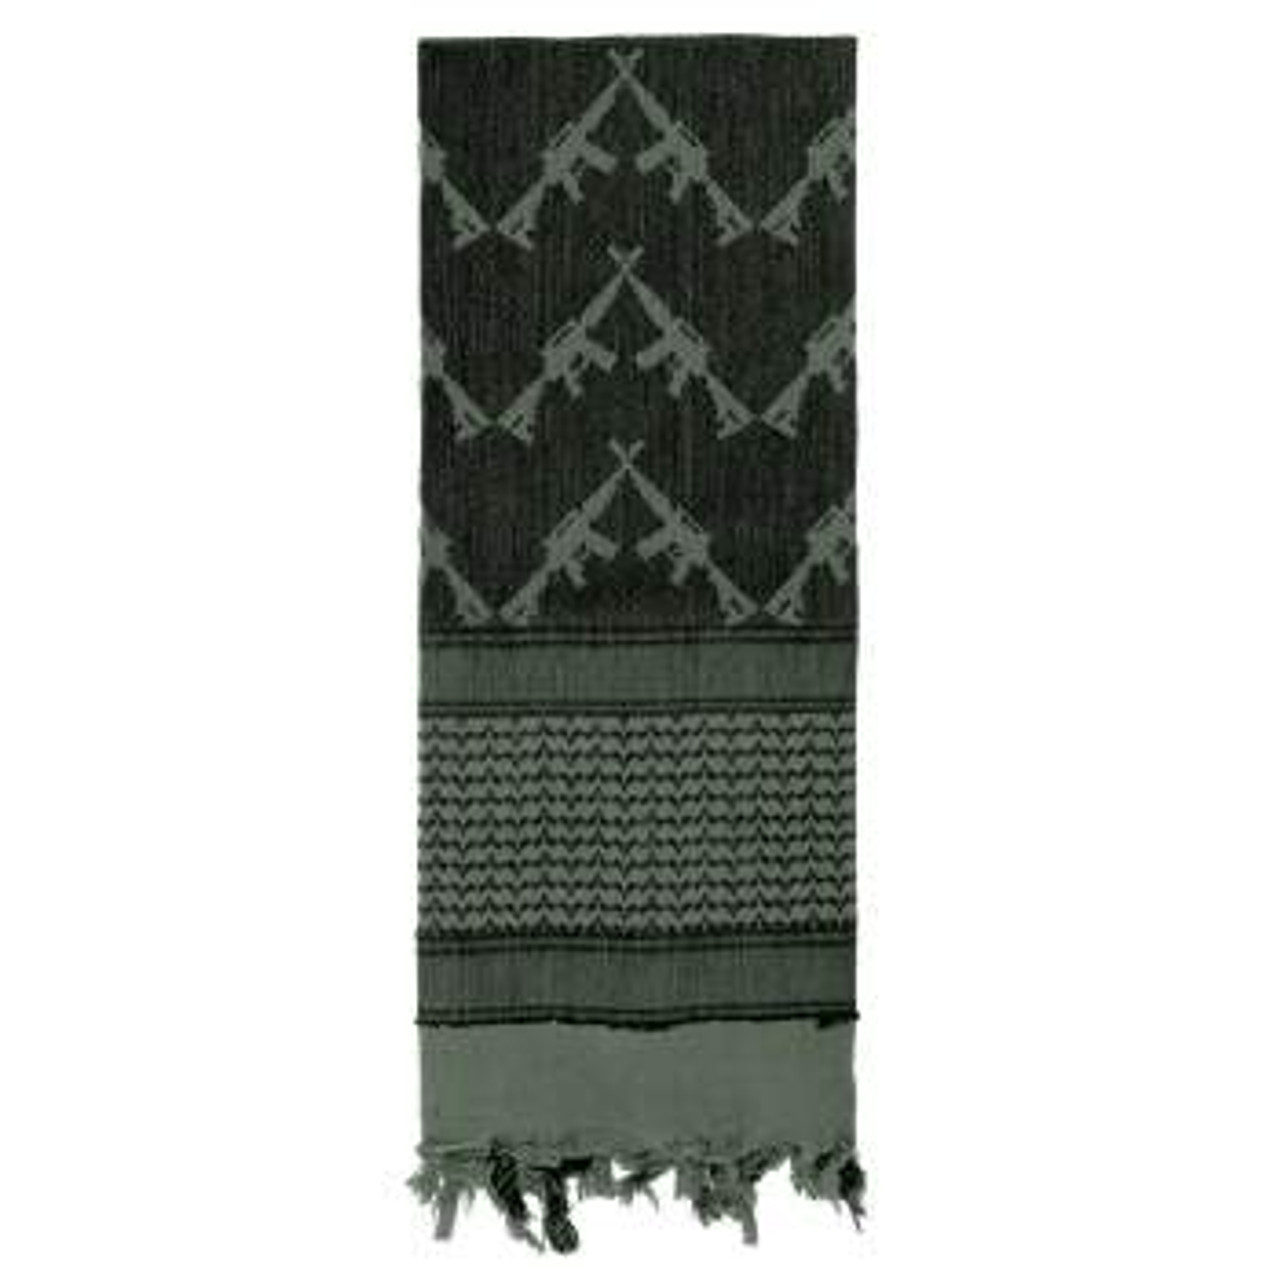 Rothco Crossed Rifles Shemagh Tactical Desert Keffiyeh Scarf, Foliage Green